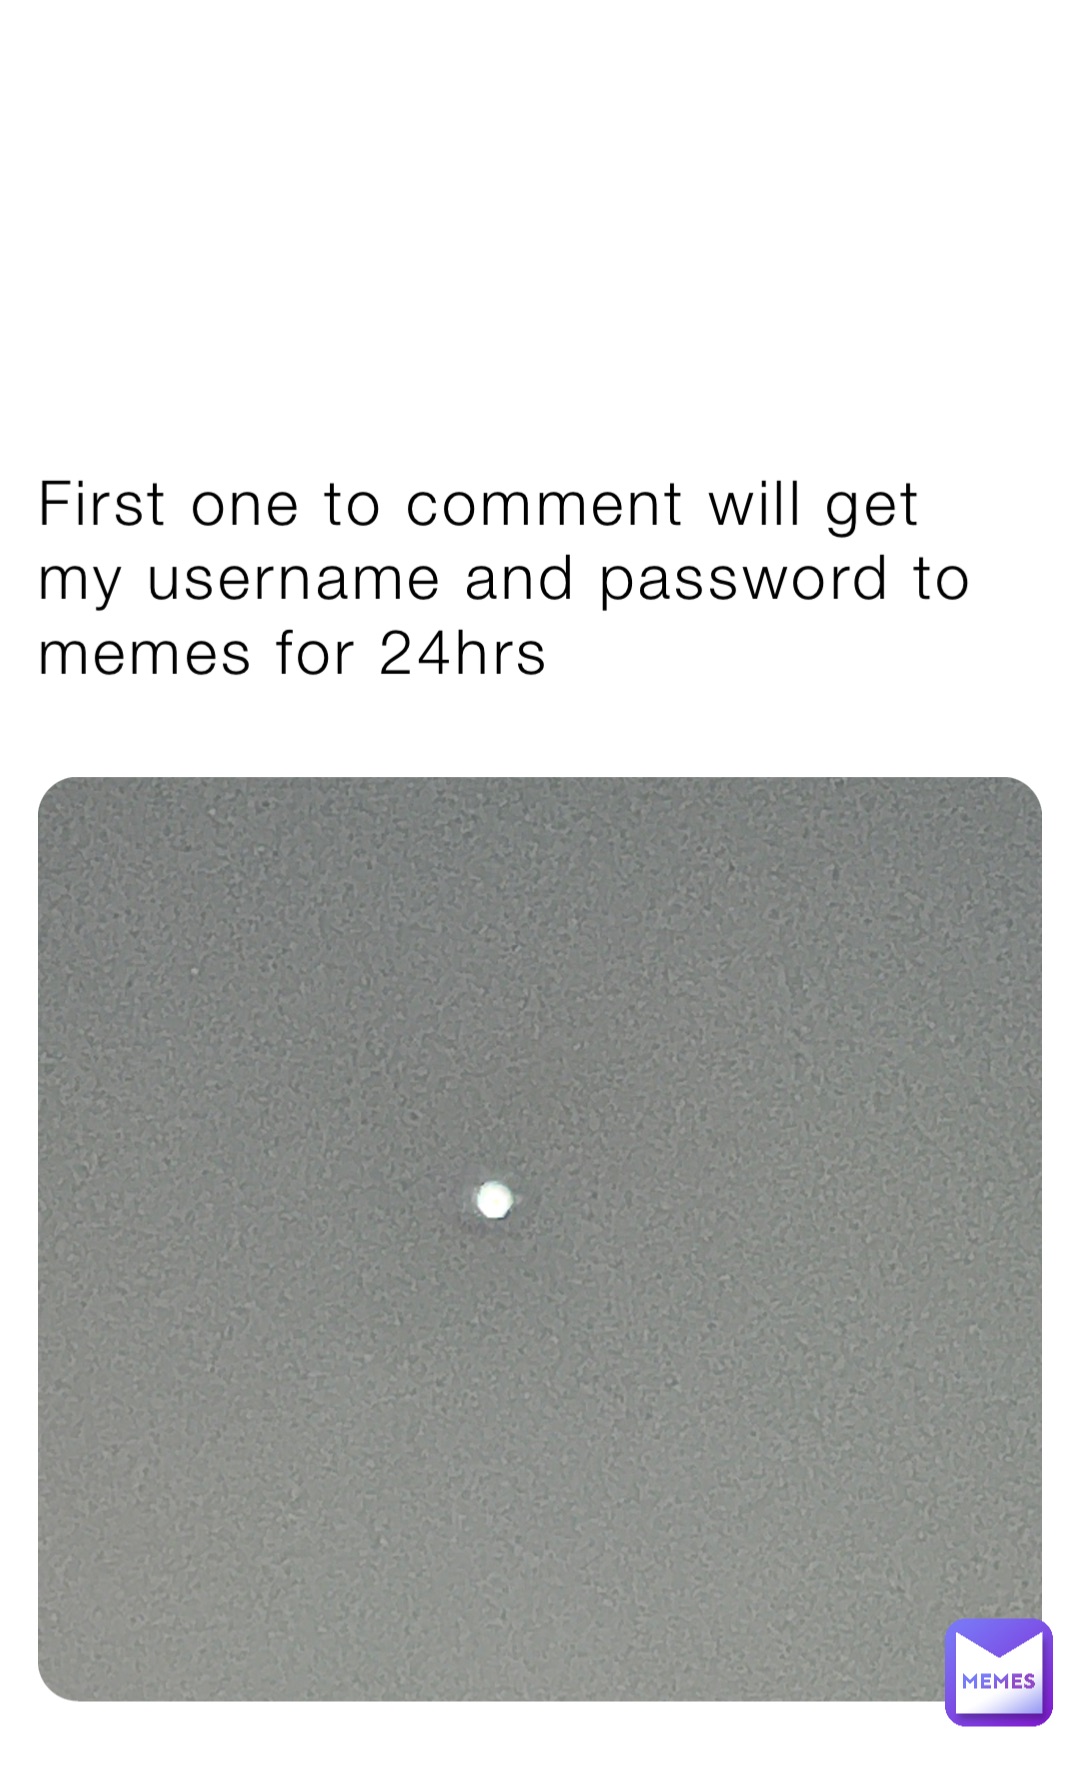 First one to comment will get my username and password to memes for 24hrs